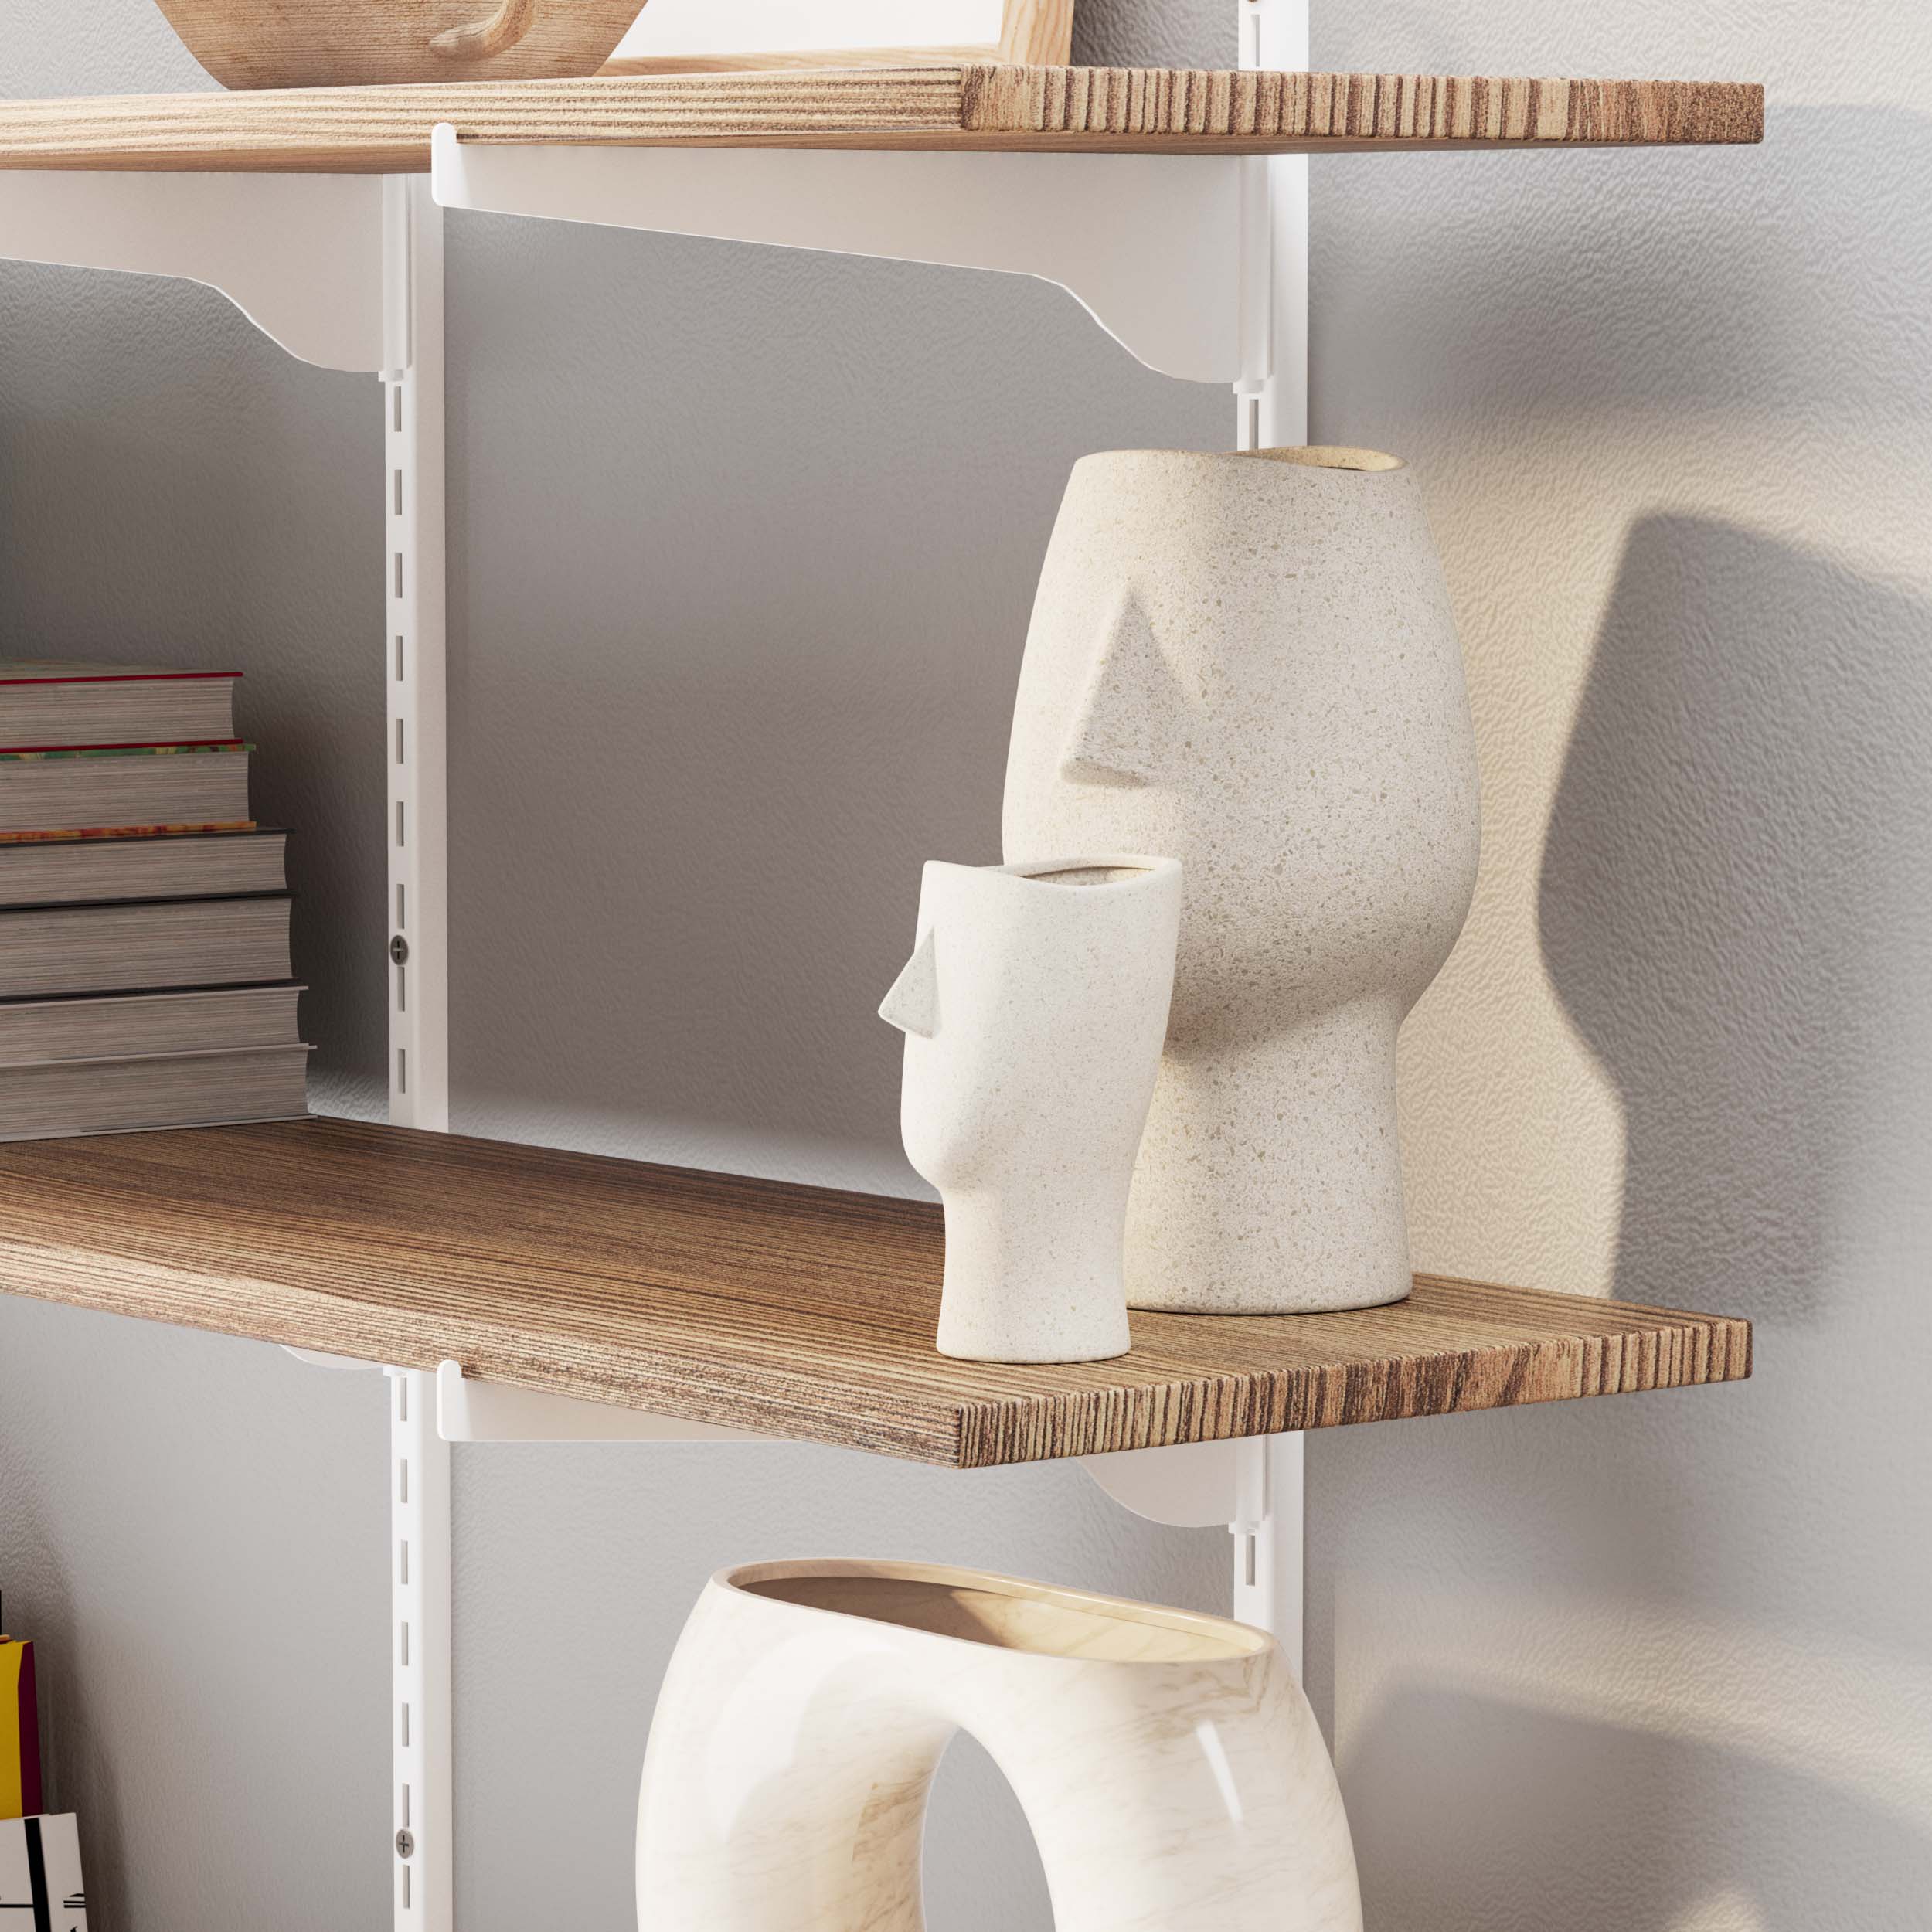 A display shelf with abstract face vases casts soft shadows on a textured wall, warm and artistic.